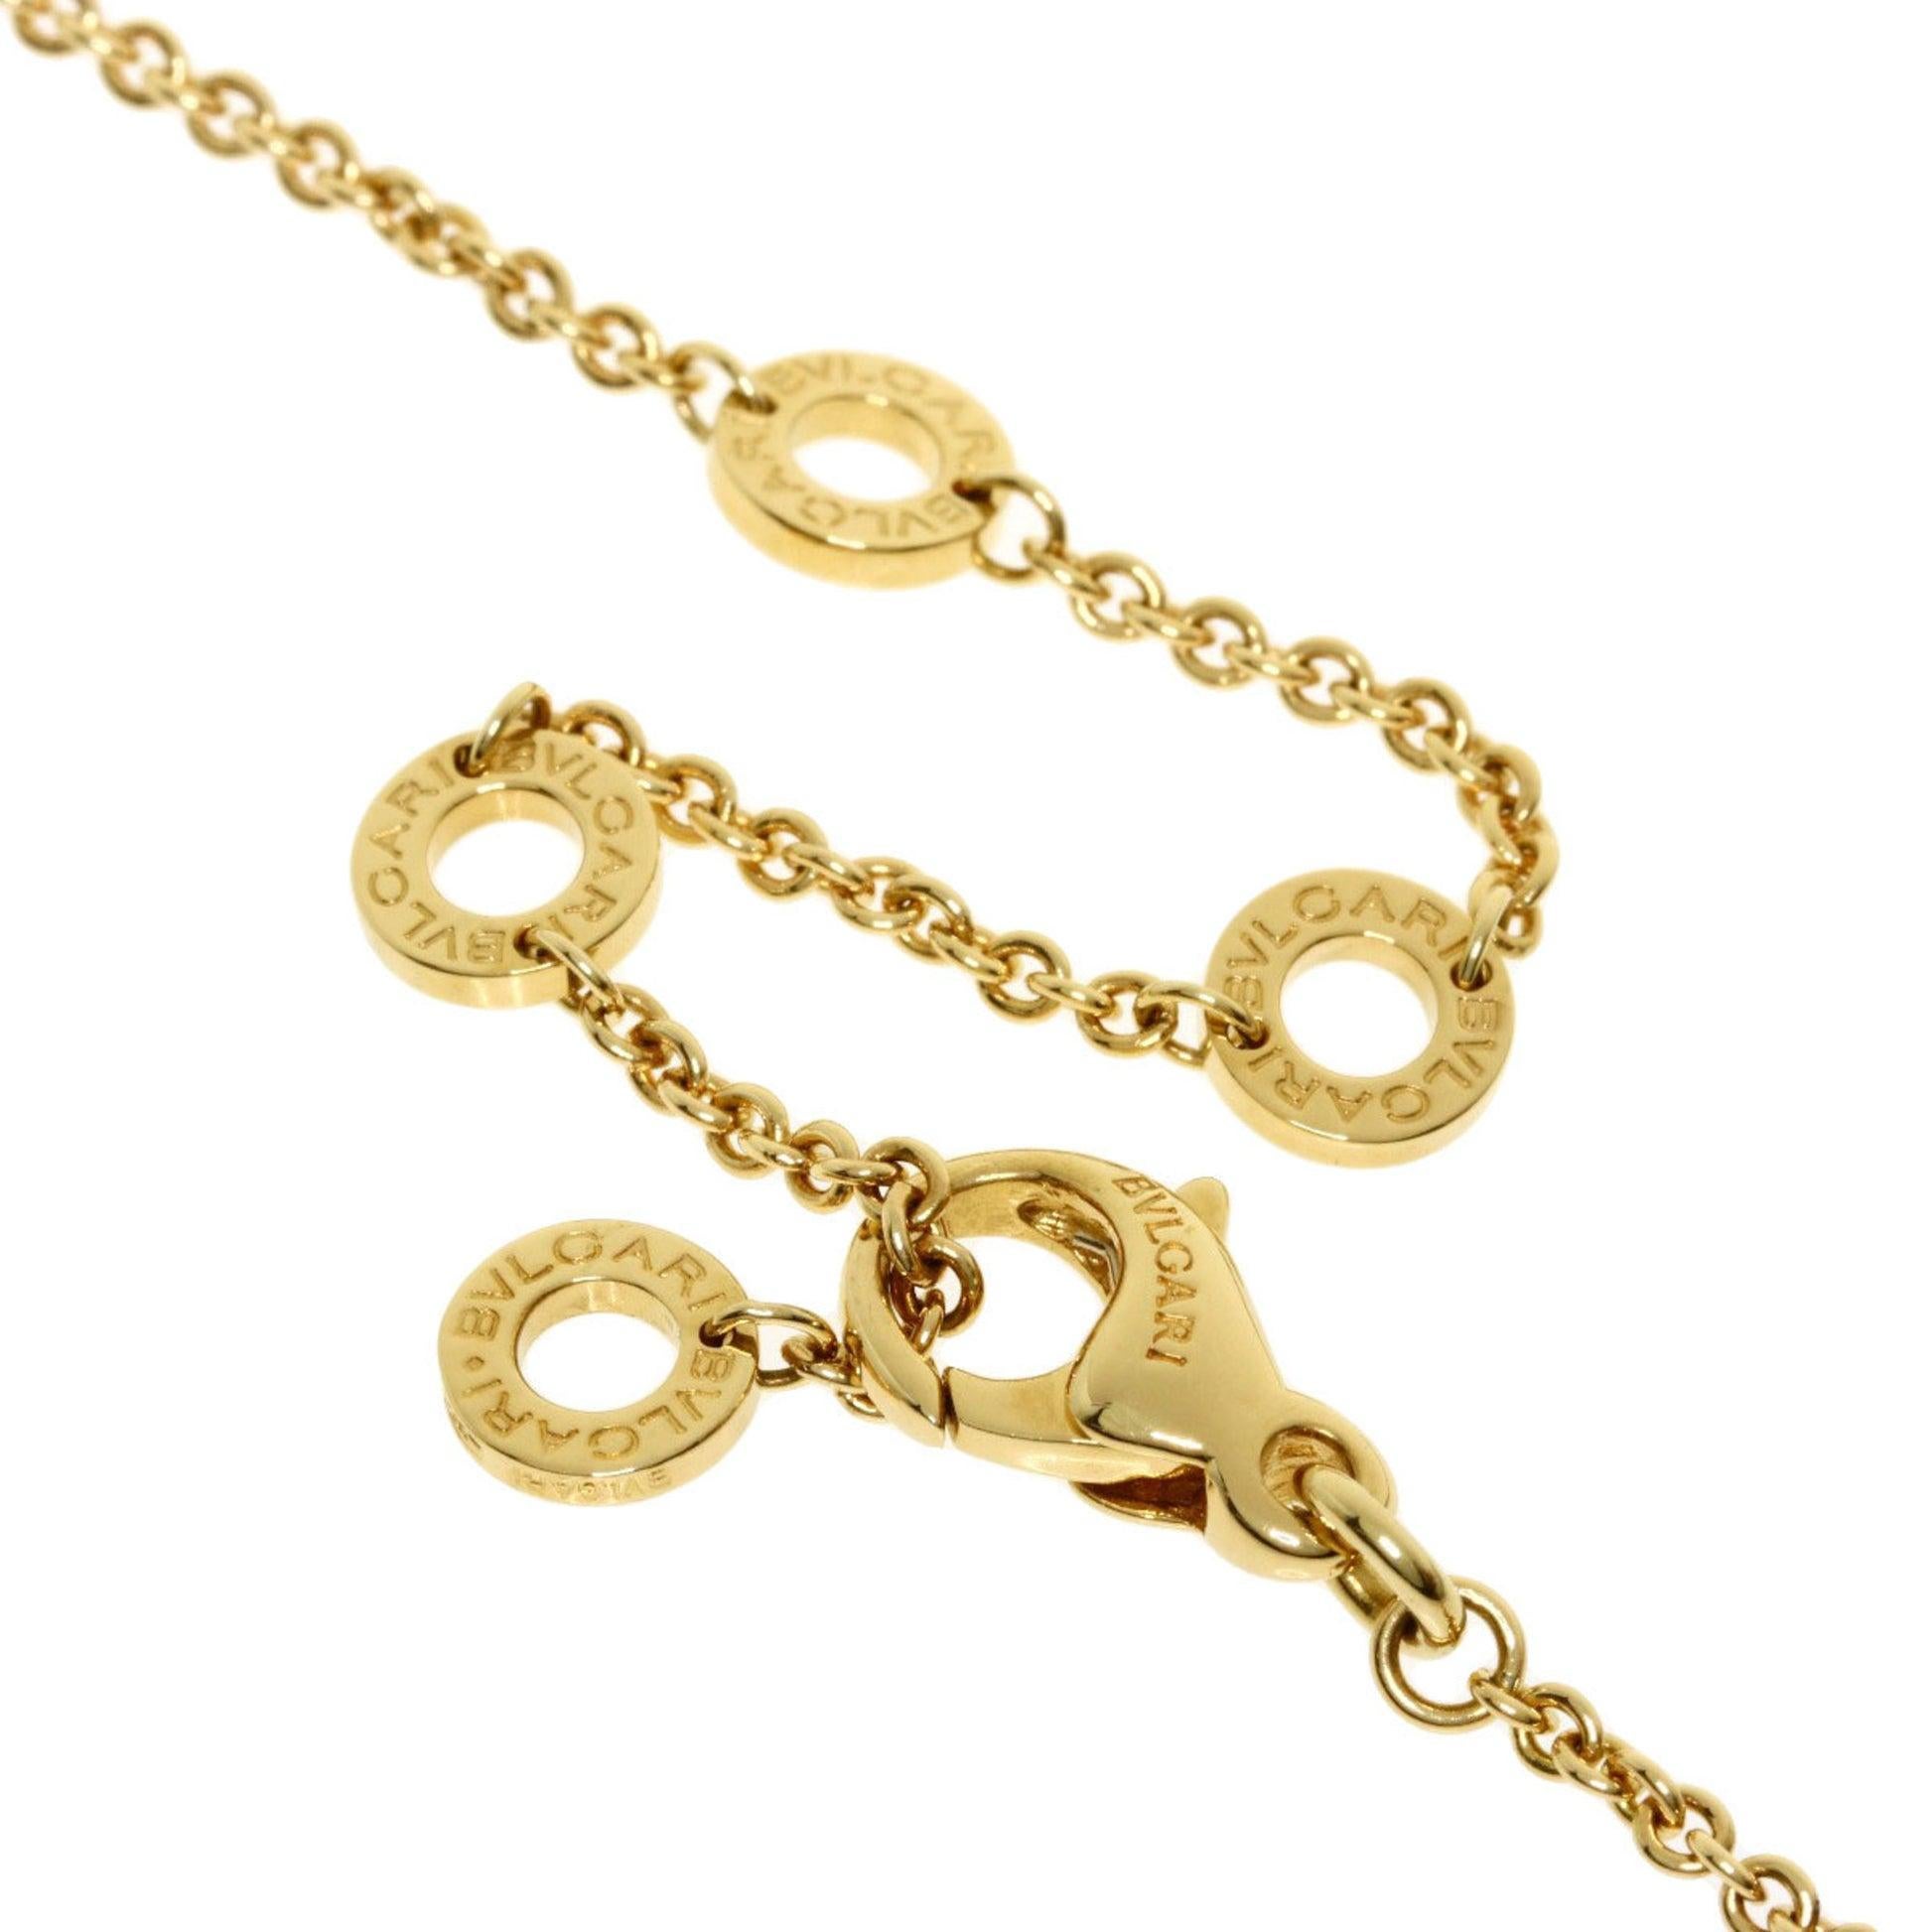 Women's Bvlgari Chicladi 7 Disc Necklace in 18K Yellow Gold For Sale